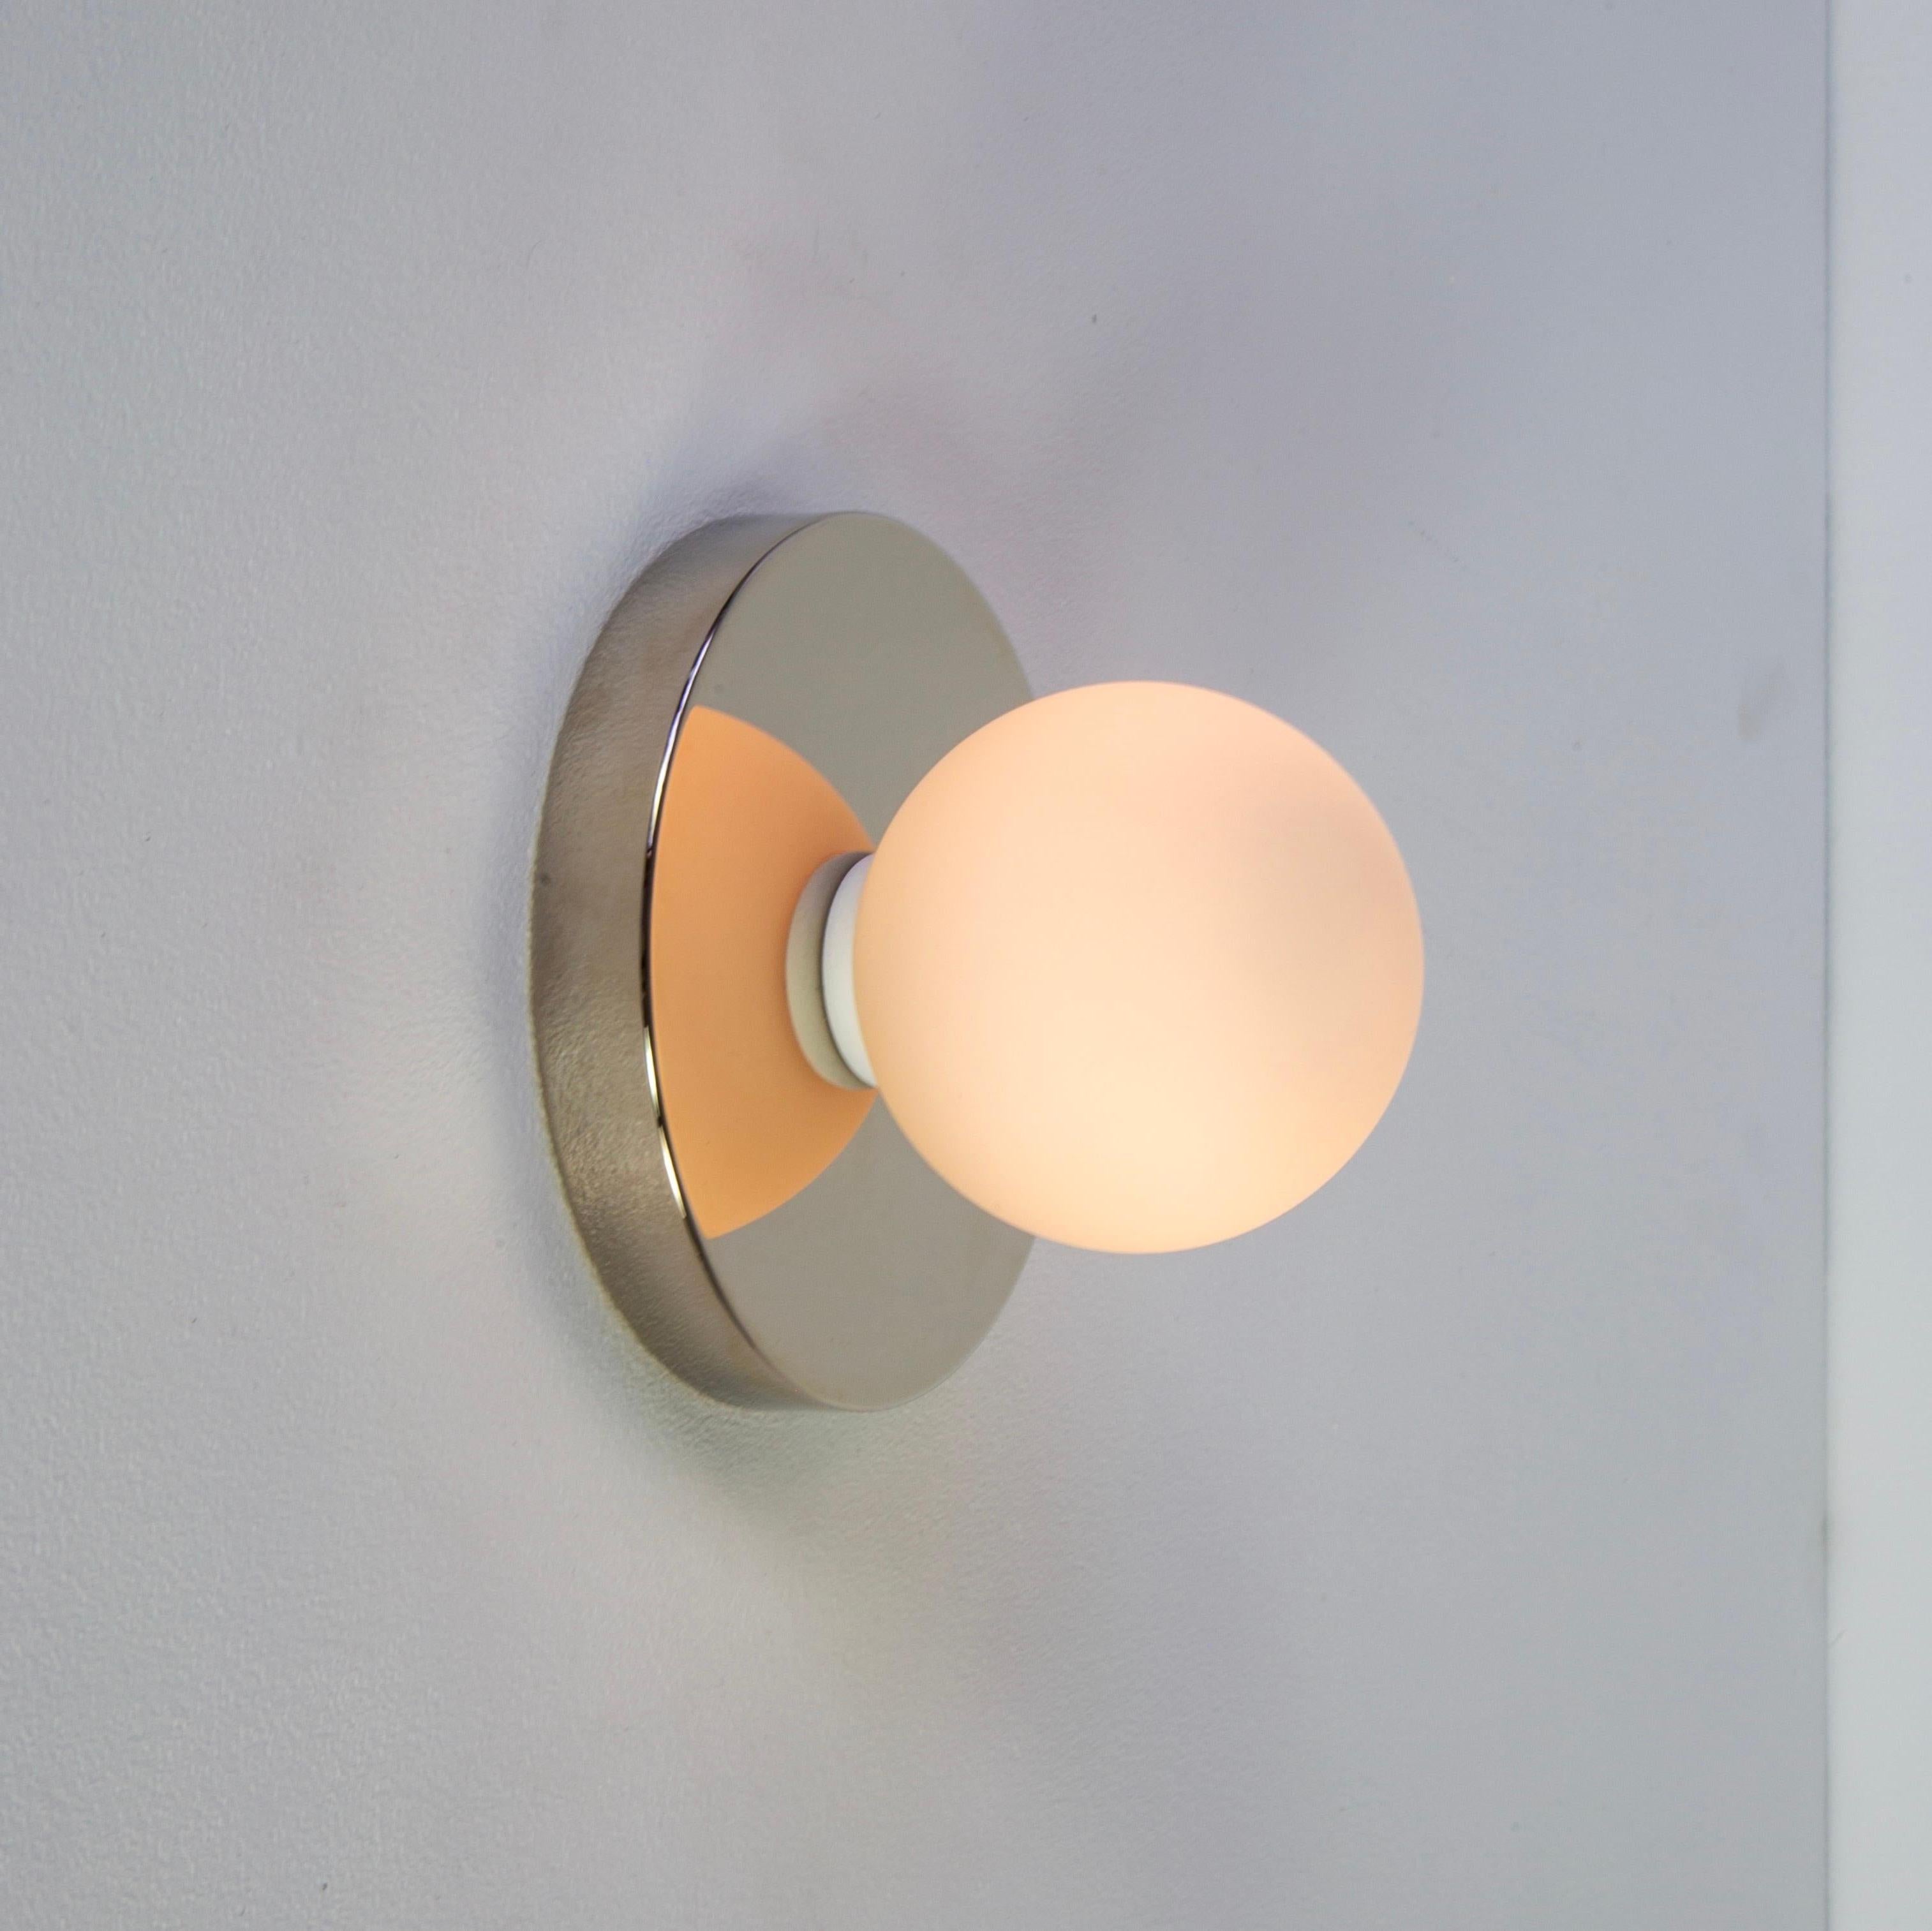 This listing is for 1x Globe Sconce in polished nickel designed and manufactured by Research.Lighting.

Materials: Brass, Steel & Glass
Finish: Polished Nickel 
Electronics: 1x G9 Socket, 1x 4.5 Watt LED Bulb (included), 450 Lumens
ADA Compliant. UL